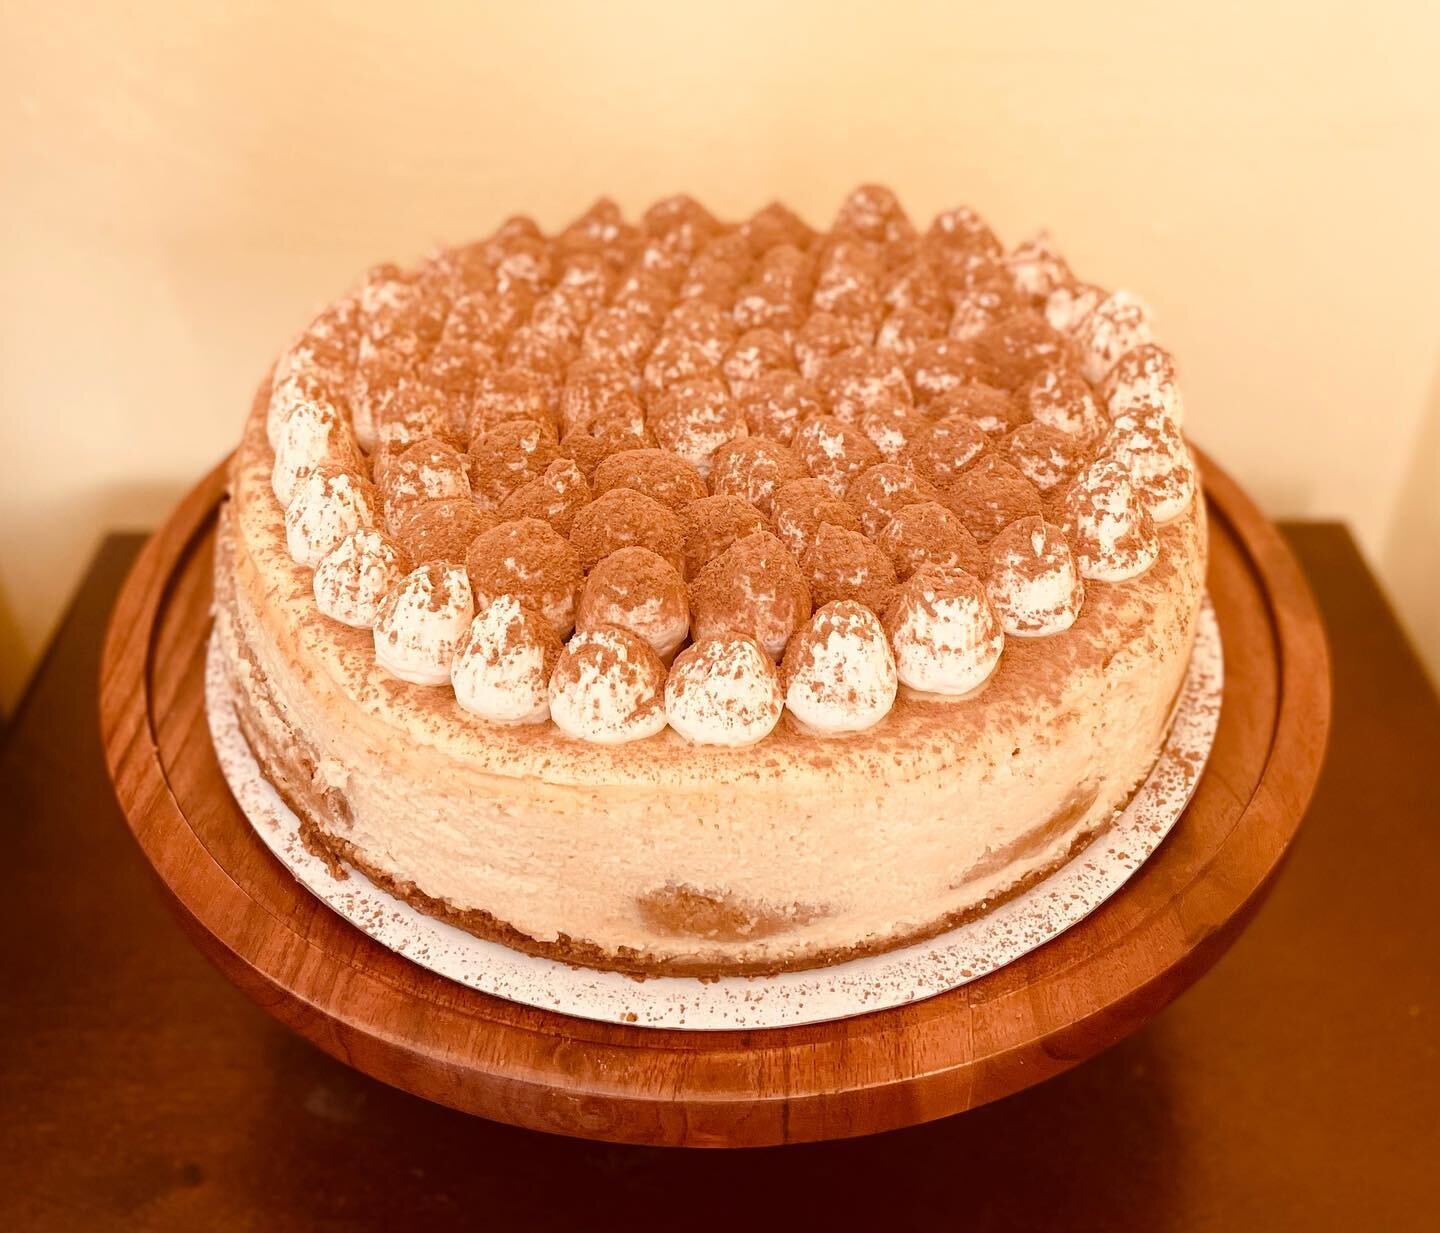 Happy Mother&rsquo;s Day weekend to all of the mom&rsquo;s out there, you are appreciated! 

Feat. our Tiramisu Cheesecake with a mocha filling, layered with homemade ladyfingers and a whipped espresso topping.

#tkab #topknot #homebakery #delicious 